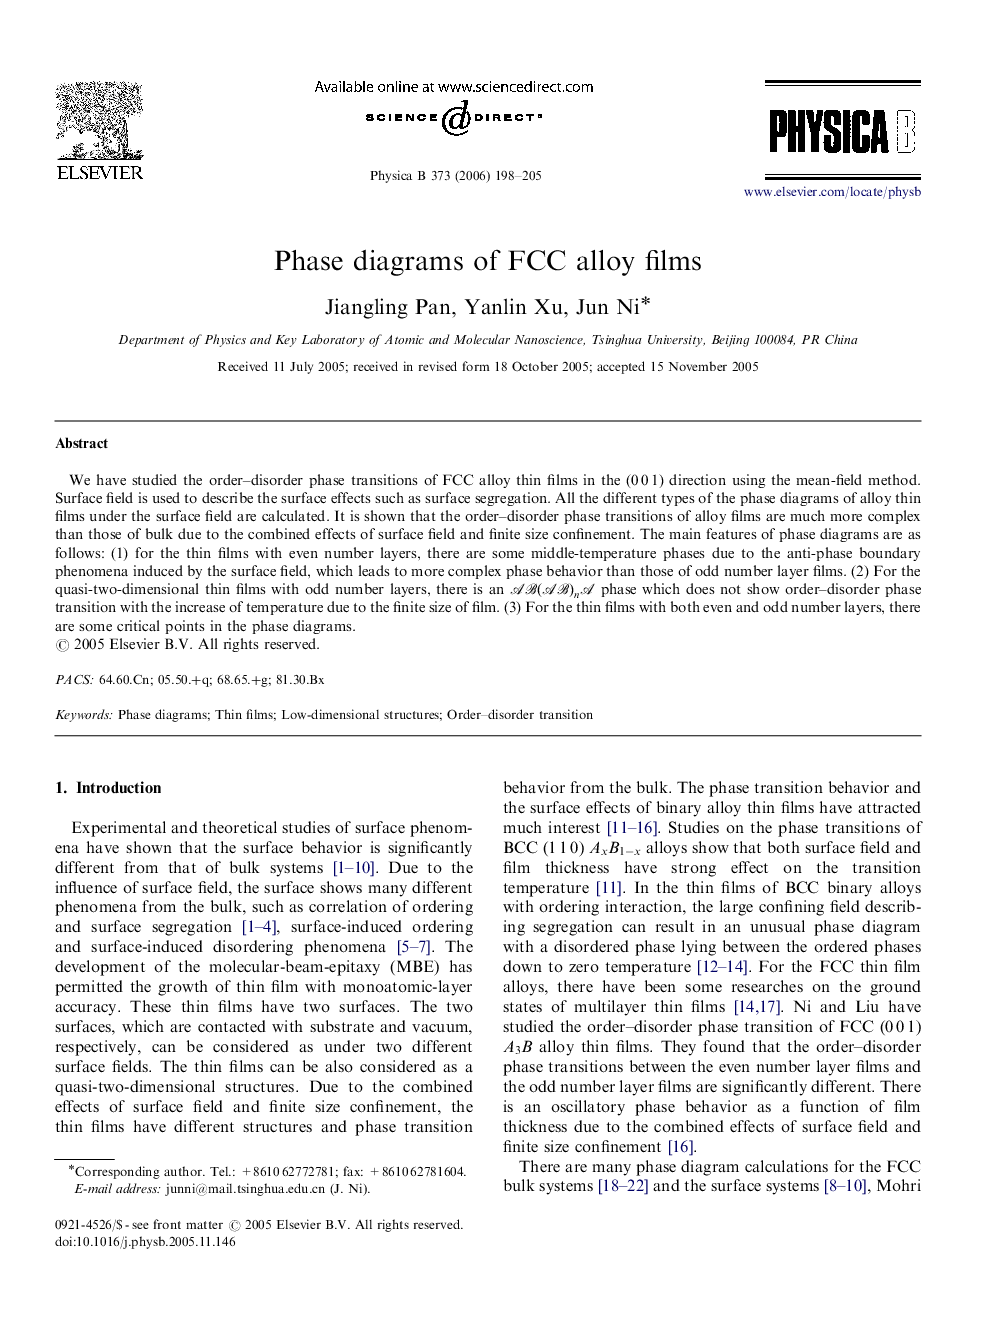 Phase diagrams of FCC alloy films